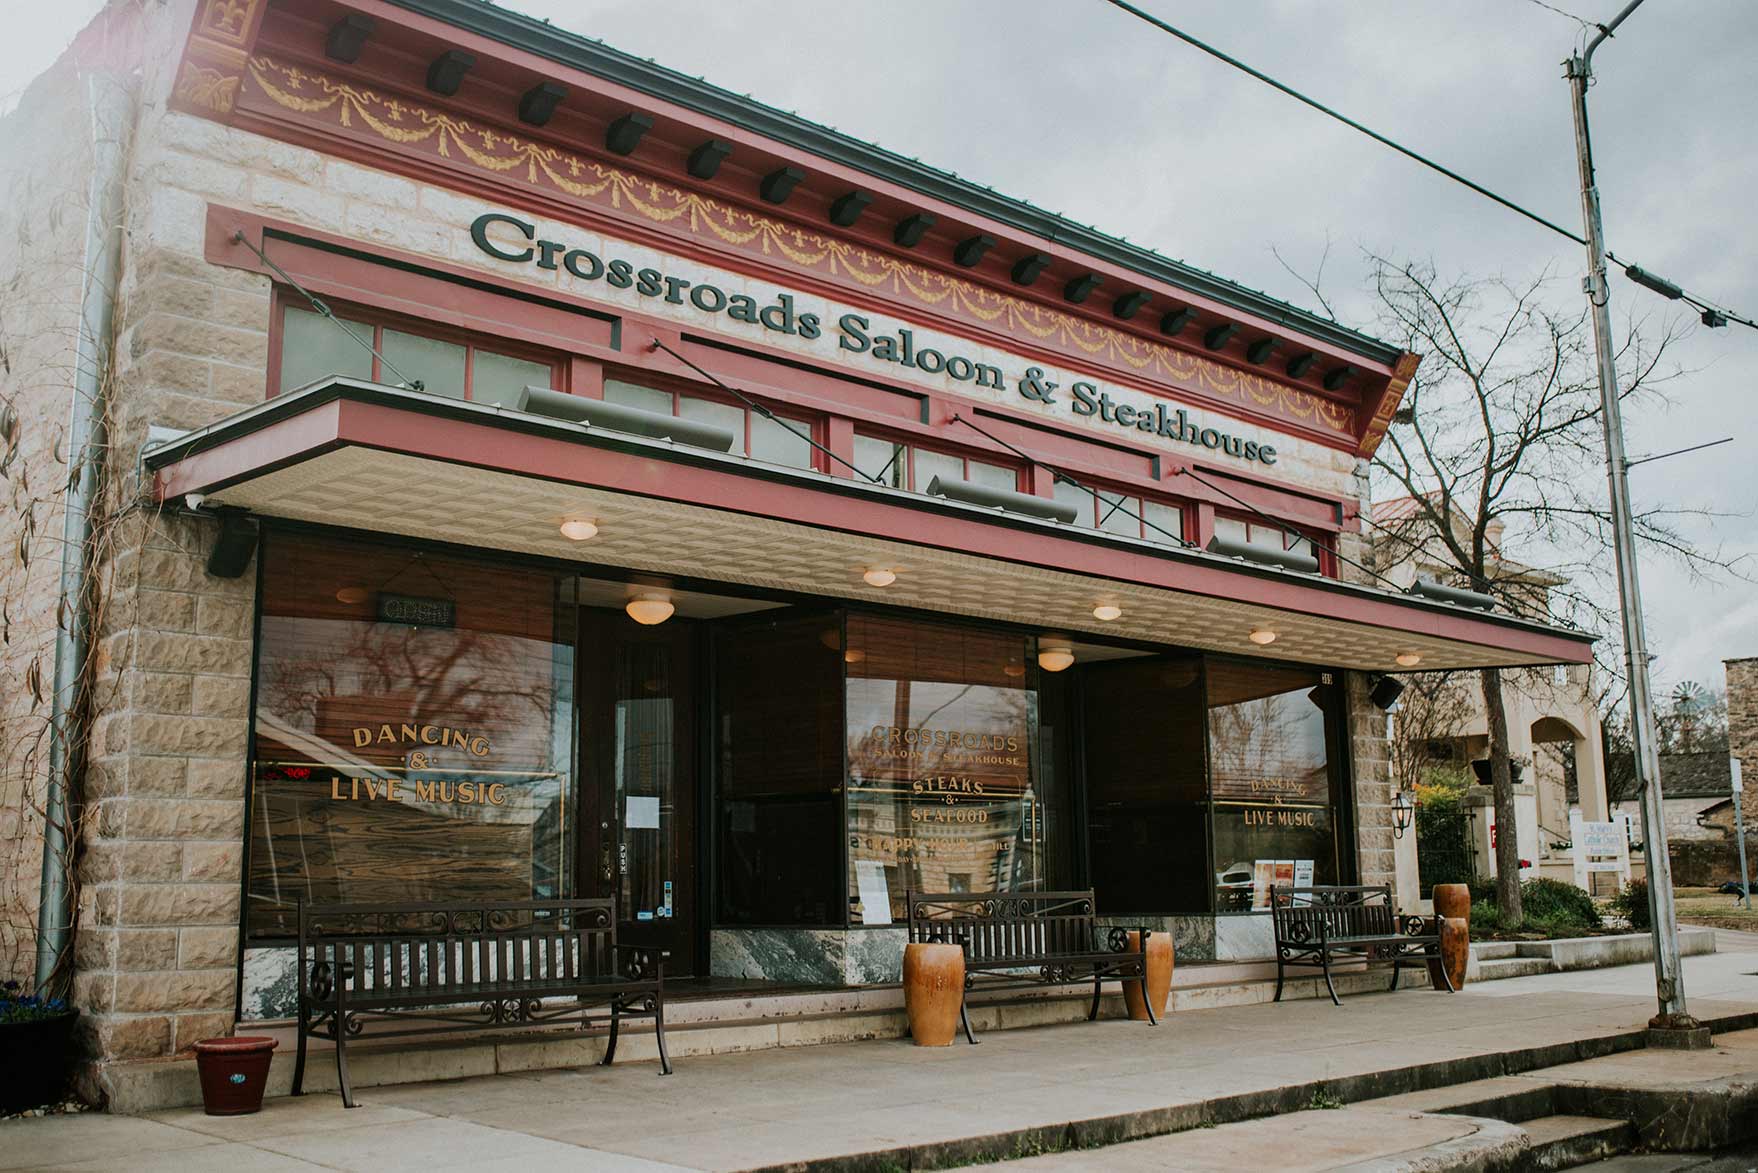 Crossroads Saloon and Steakhouse